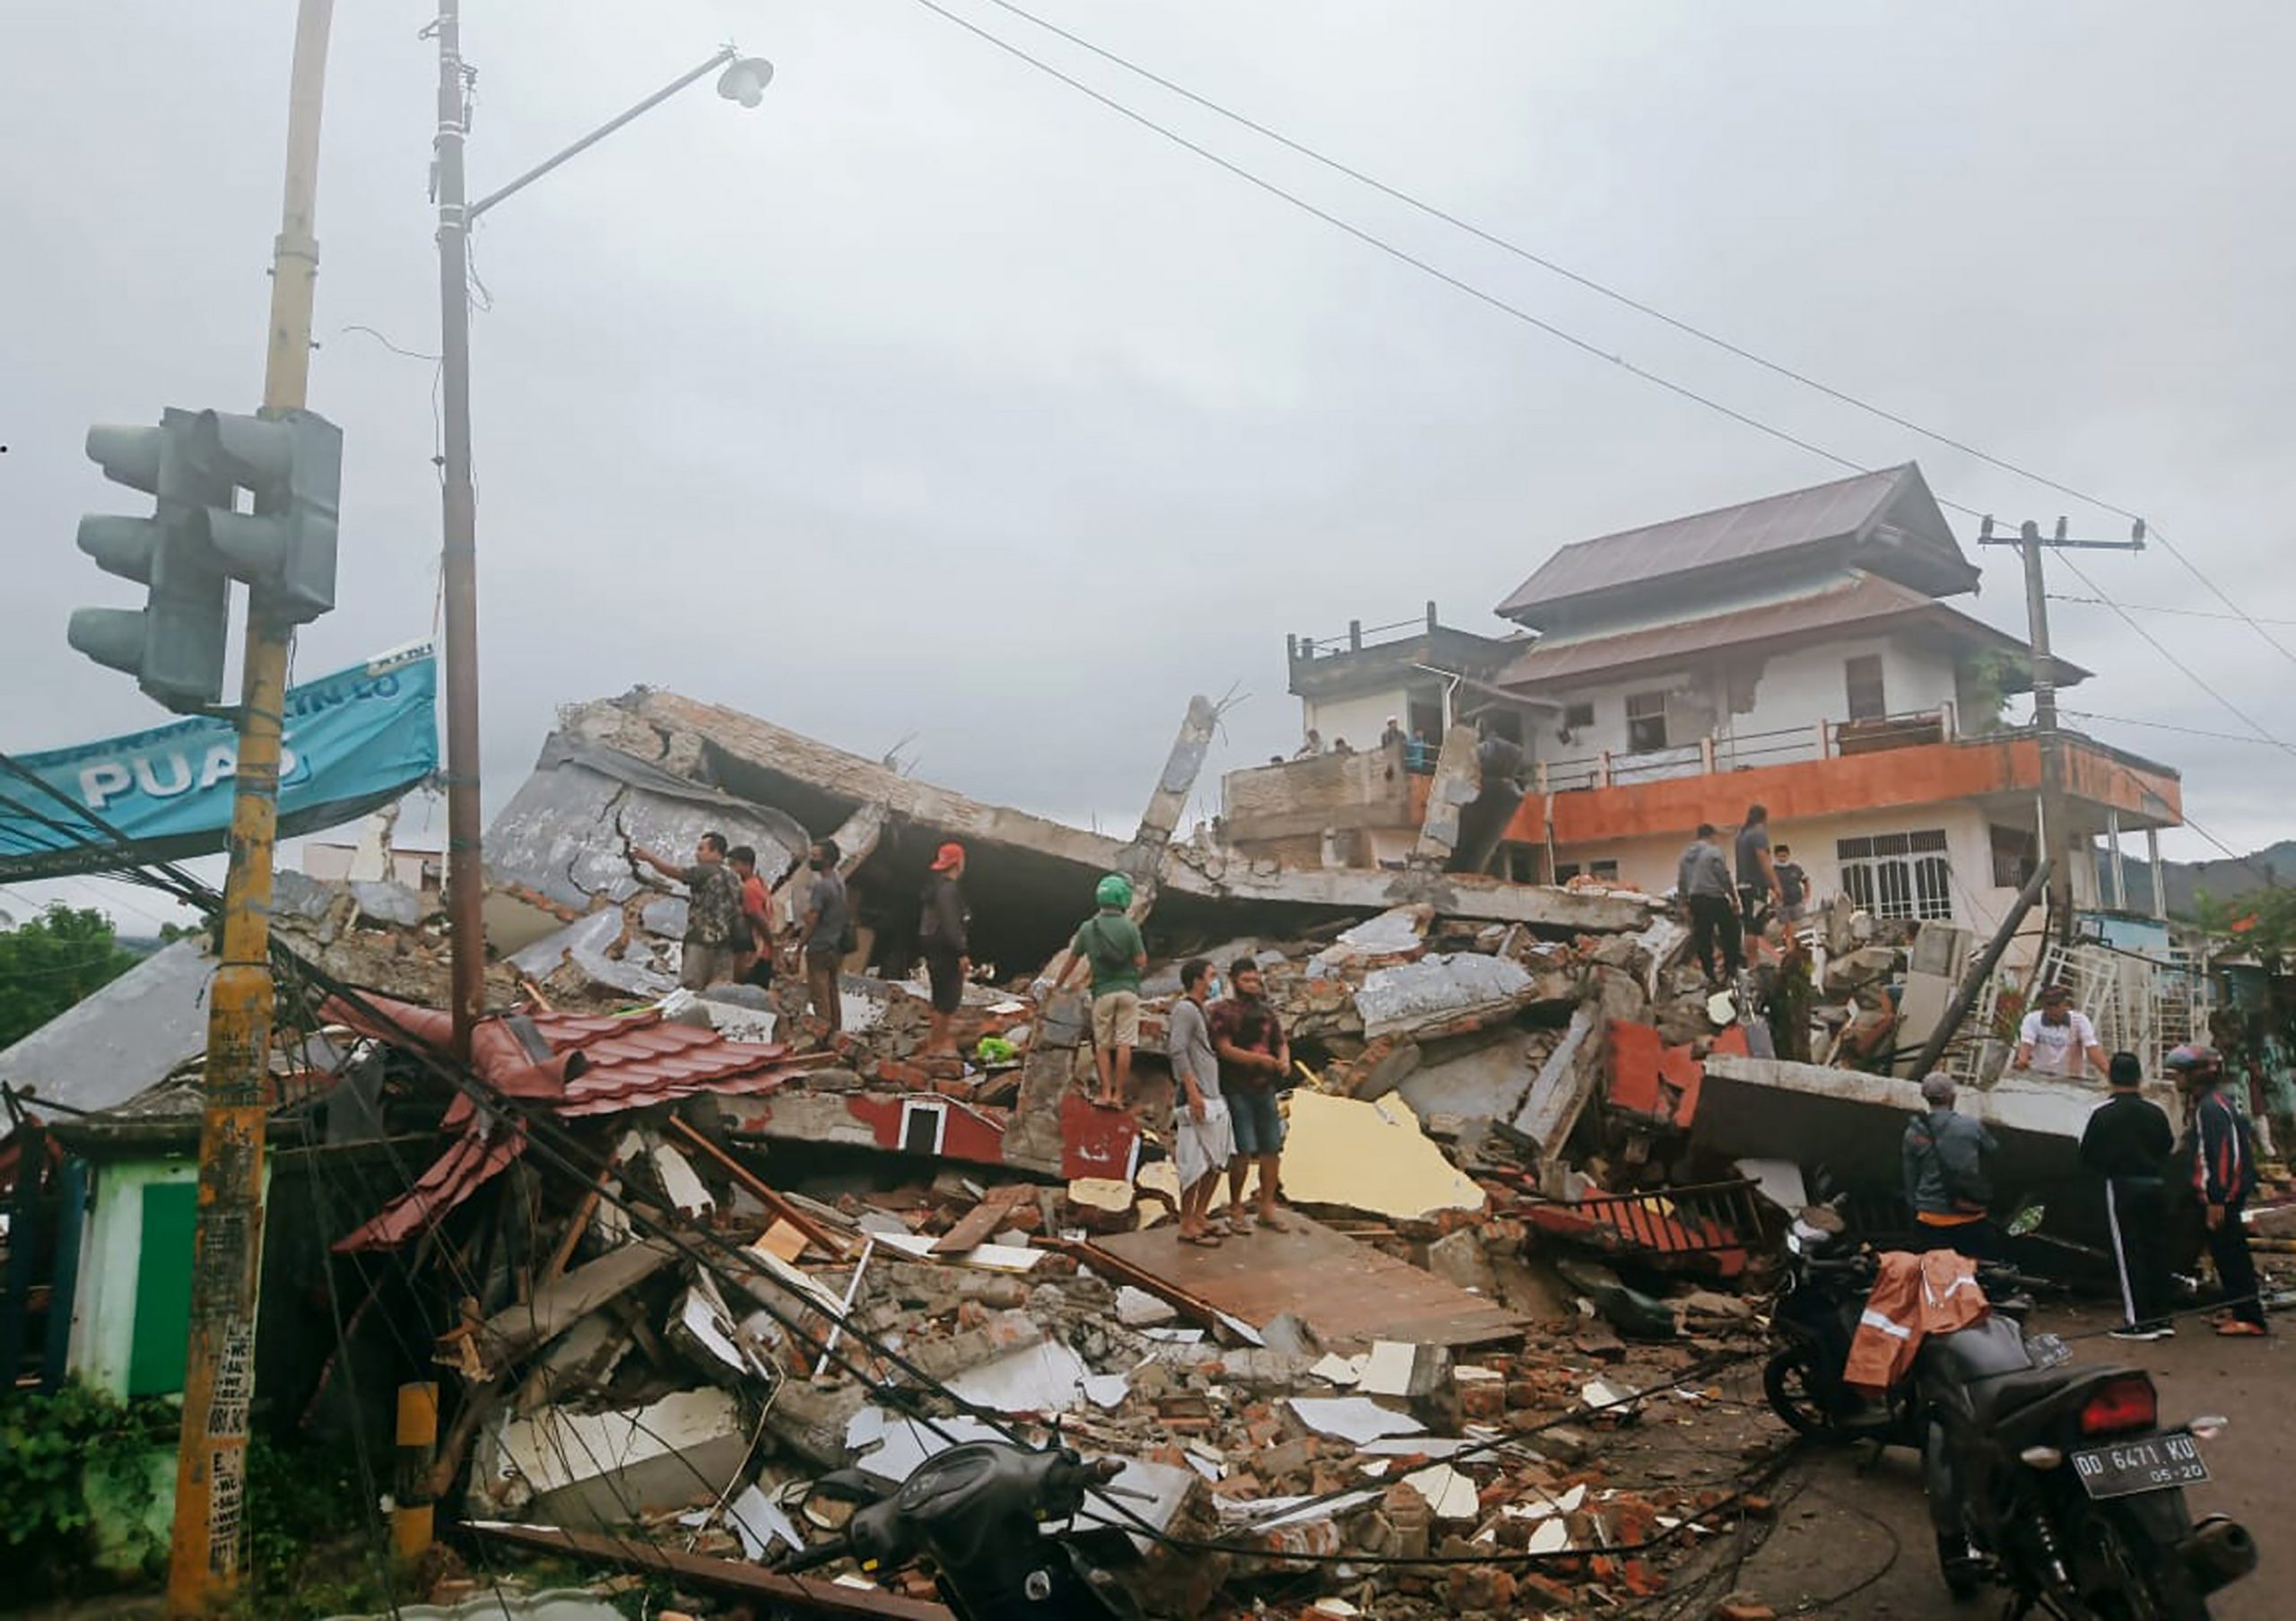 Update: Over 50 killed and 700 injured in Indonesian quake